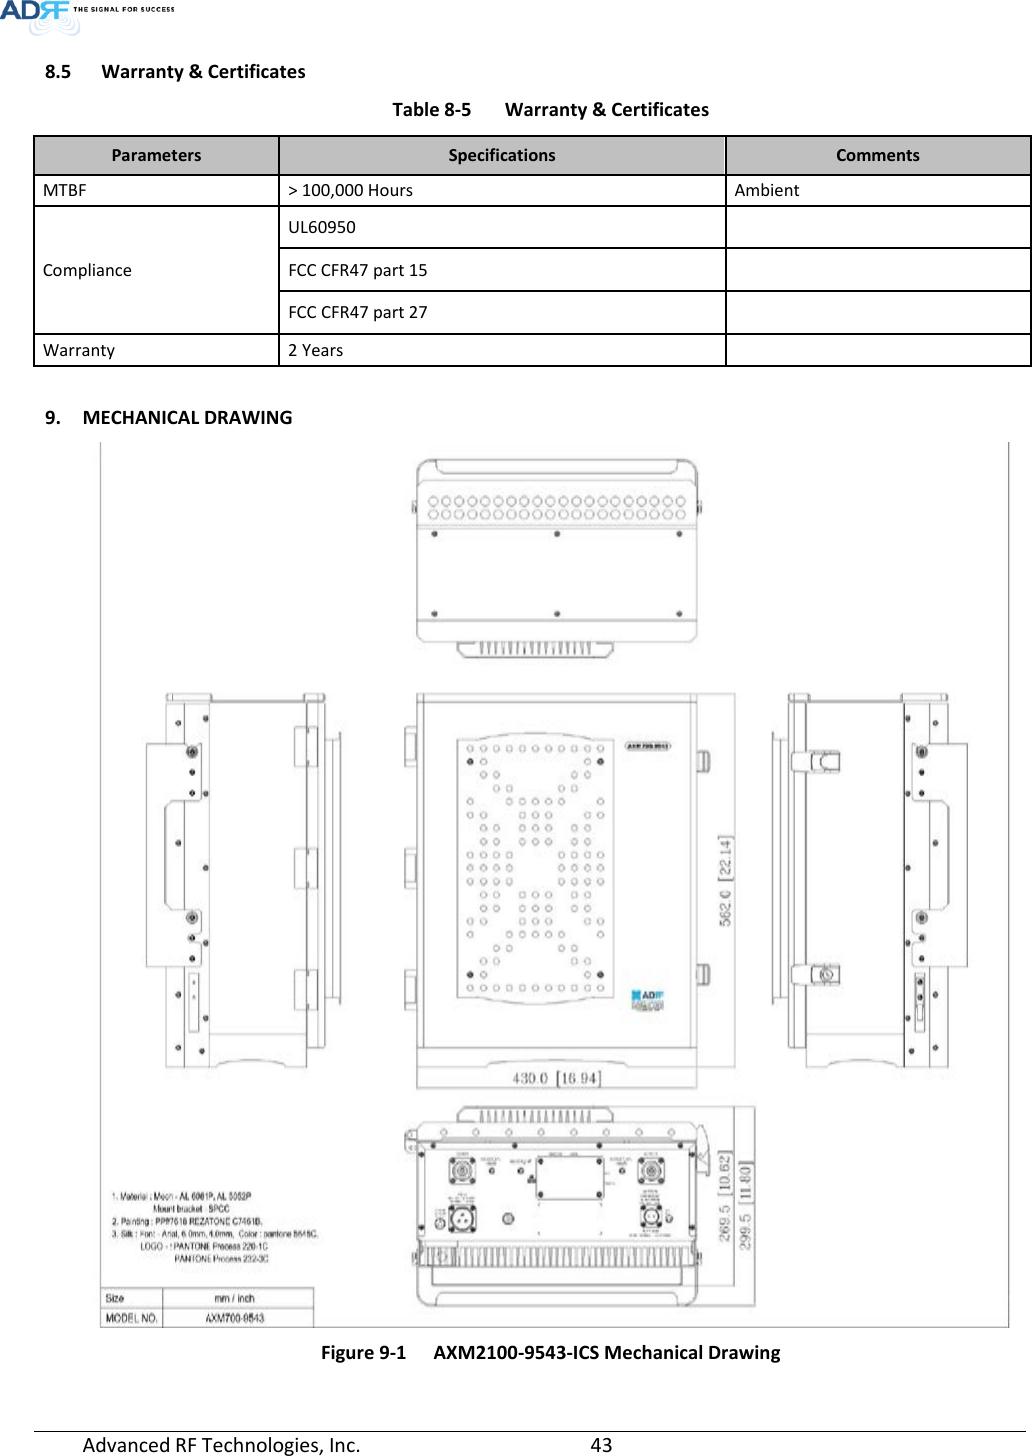  8.5 Warranty &amp; Certificates Table 8-5  Warranty &amp; Certificates Parameters  Specifications  Comments MTBF &gt; 100,000 Hours Ambient Compliance UL60950    FCC CFR47 part 15    FCC CFR47 part 27    Warranty 2 Years     9. MECHANICAL DRAWING  Figure 9-1  AXM2100-9543-ICS Mechanical Drawing Advanced RF Technologies, Inc.       43    